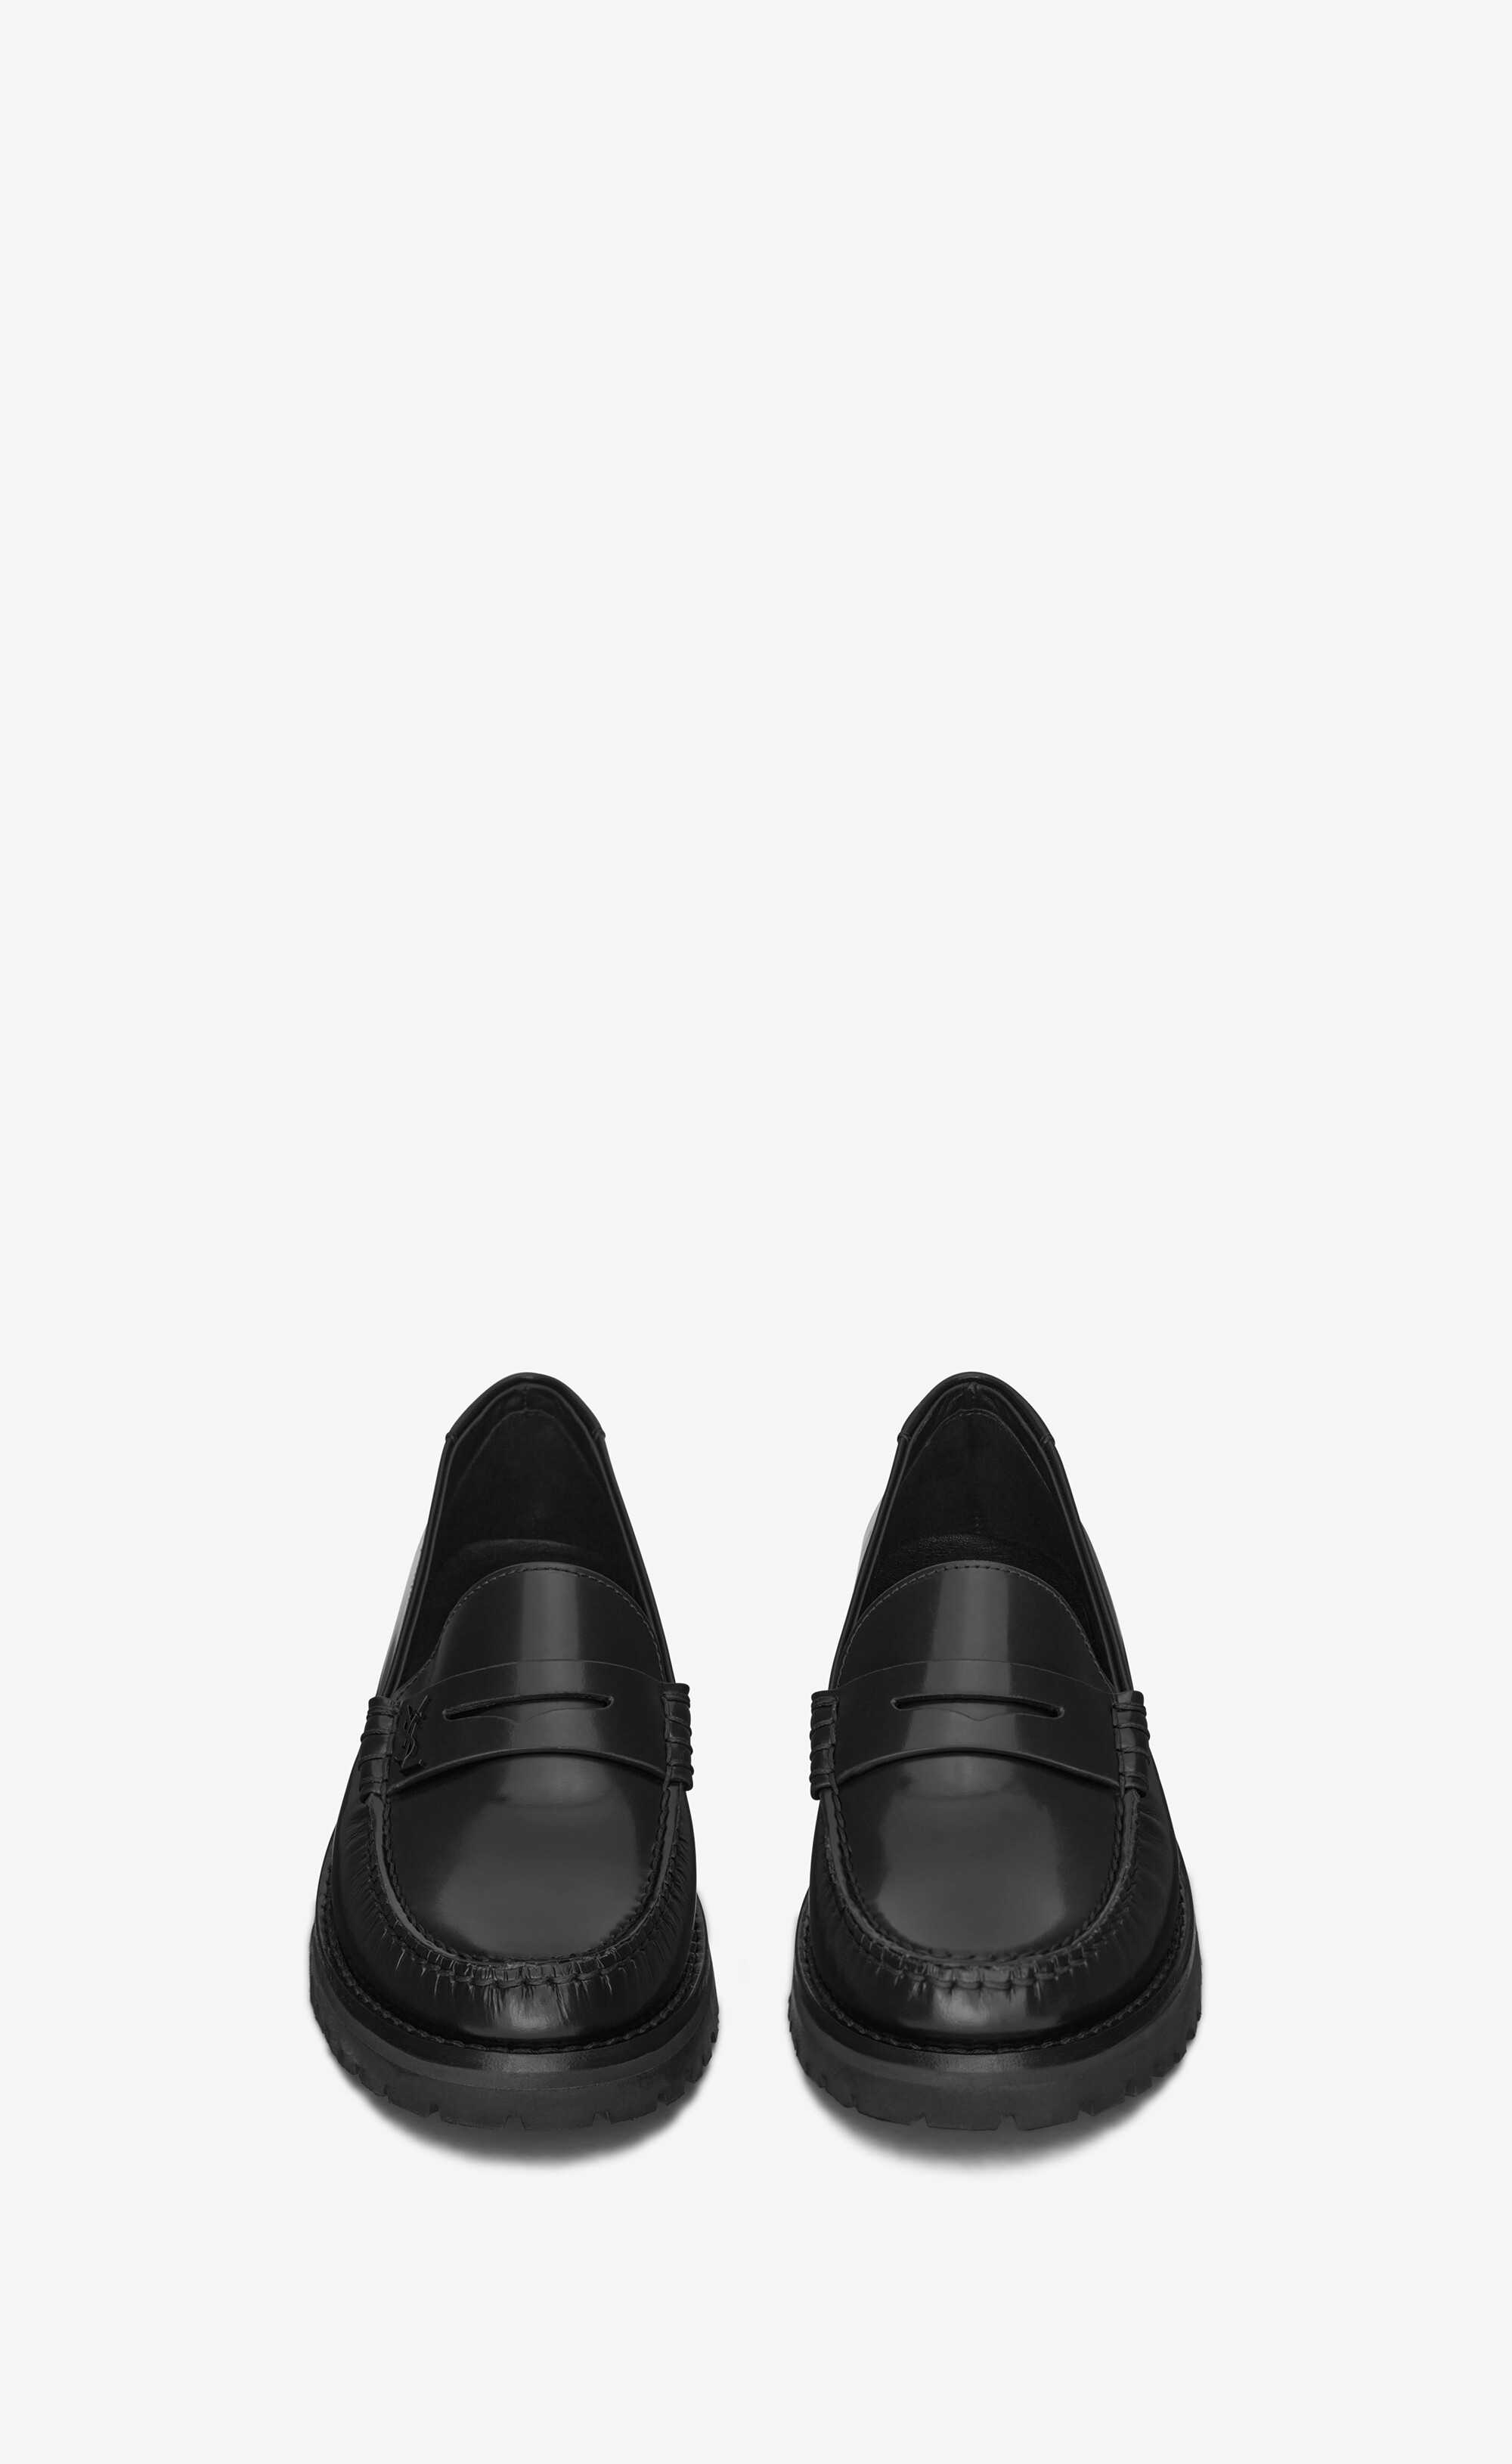 Shop Saint Laurent 2023 SS Loafer & Moccasin Shoes (716556AO9VV1000,  716556AO9VV 1000, 716556AO9VV, 716556 AO9VV 1000, 716556 AO9VV, BLACK  LEATHER LE LOAFERS LOAFERS) by CiaoItalia